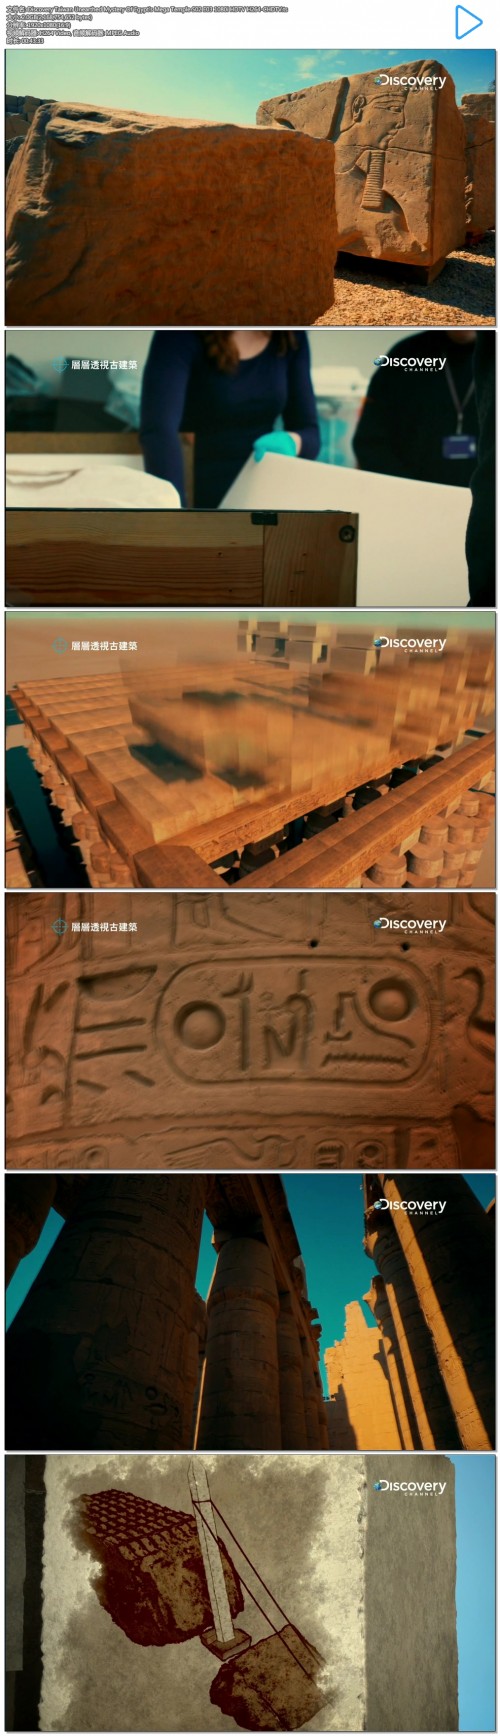 Discovery Taiwan Unearthed Mystery Of Egypt's Mega Temple S02 E03 1080i HDTV H264 CHDTV.ts